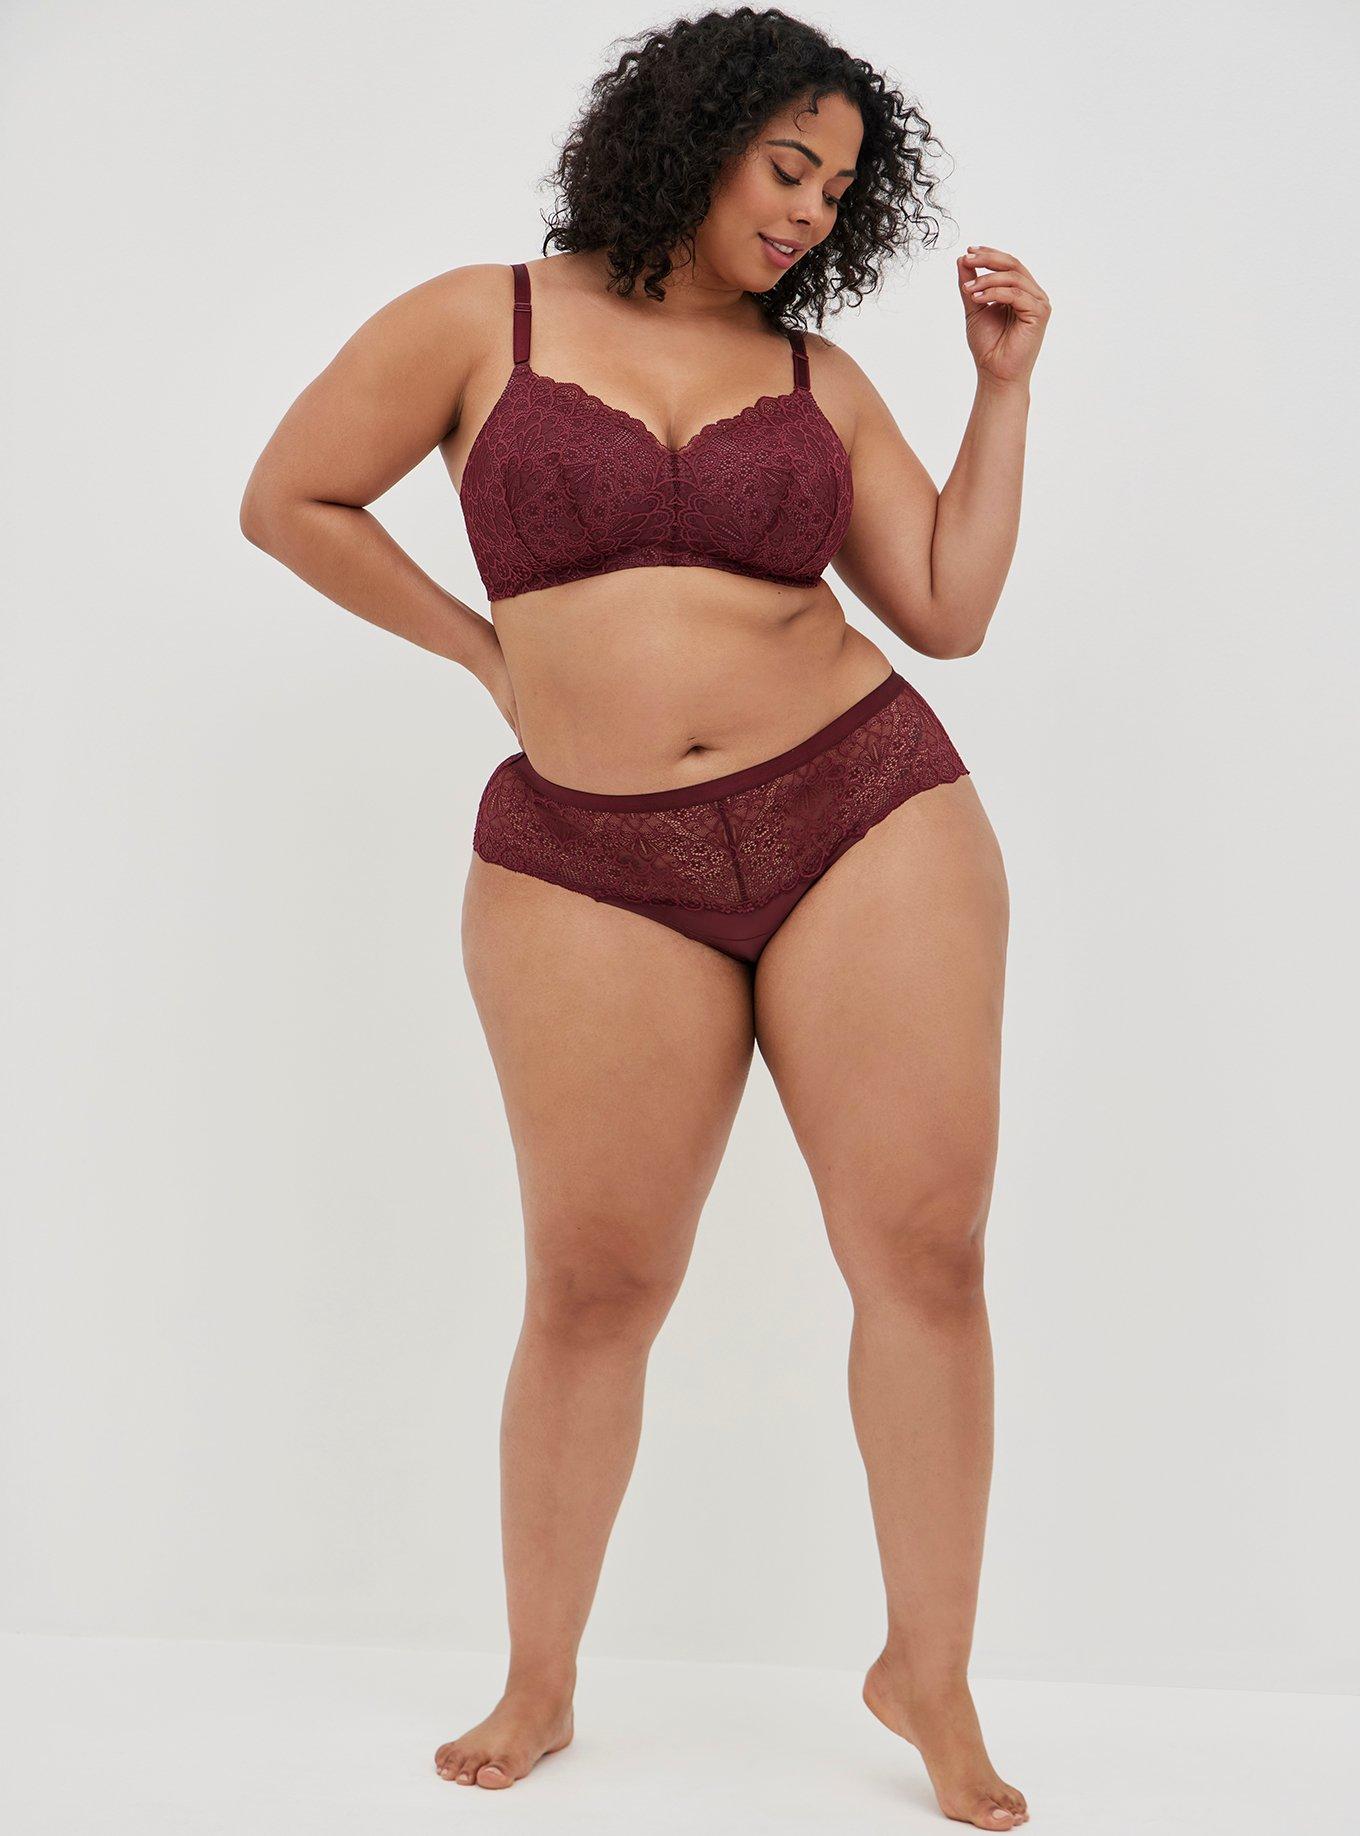 Torrid Cheeky Panties Underwear Curve Iced Coffee Chill Out Plus